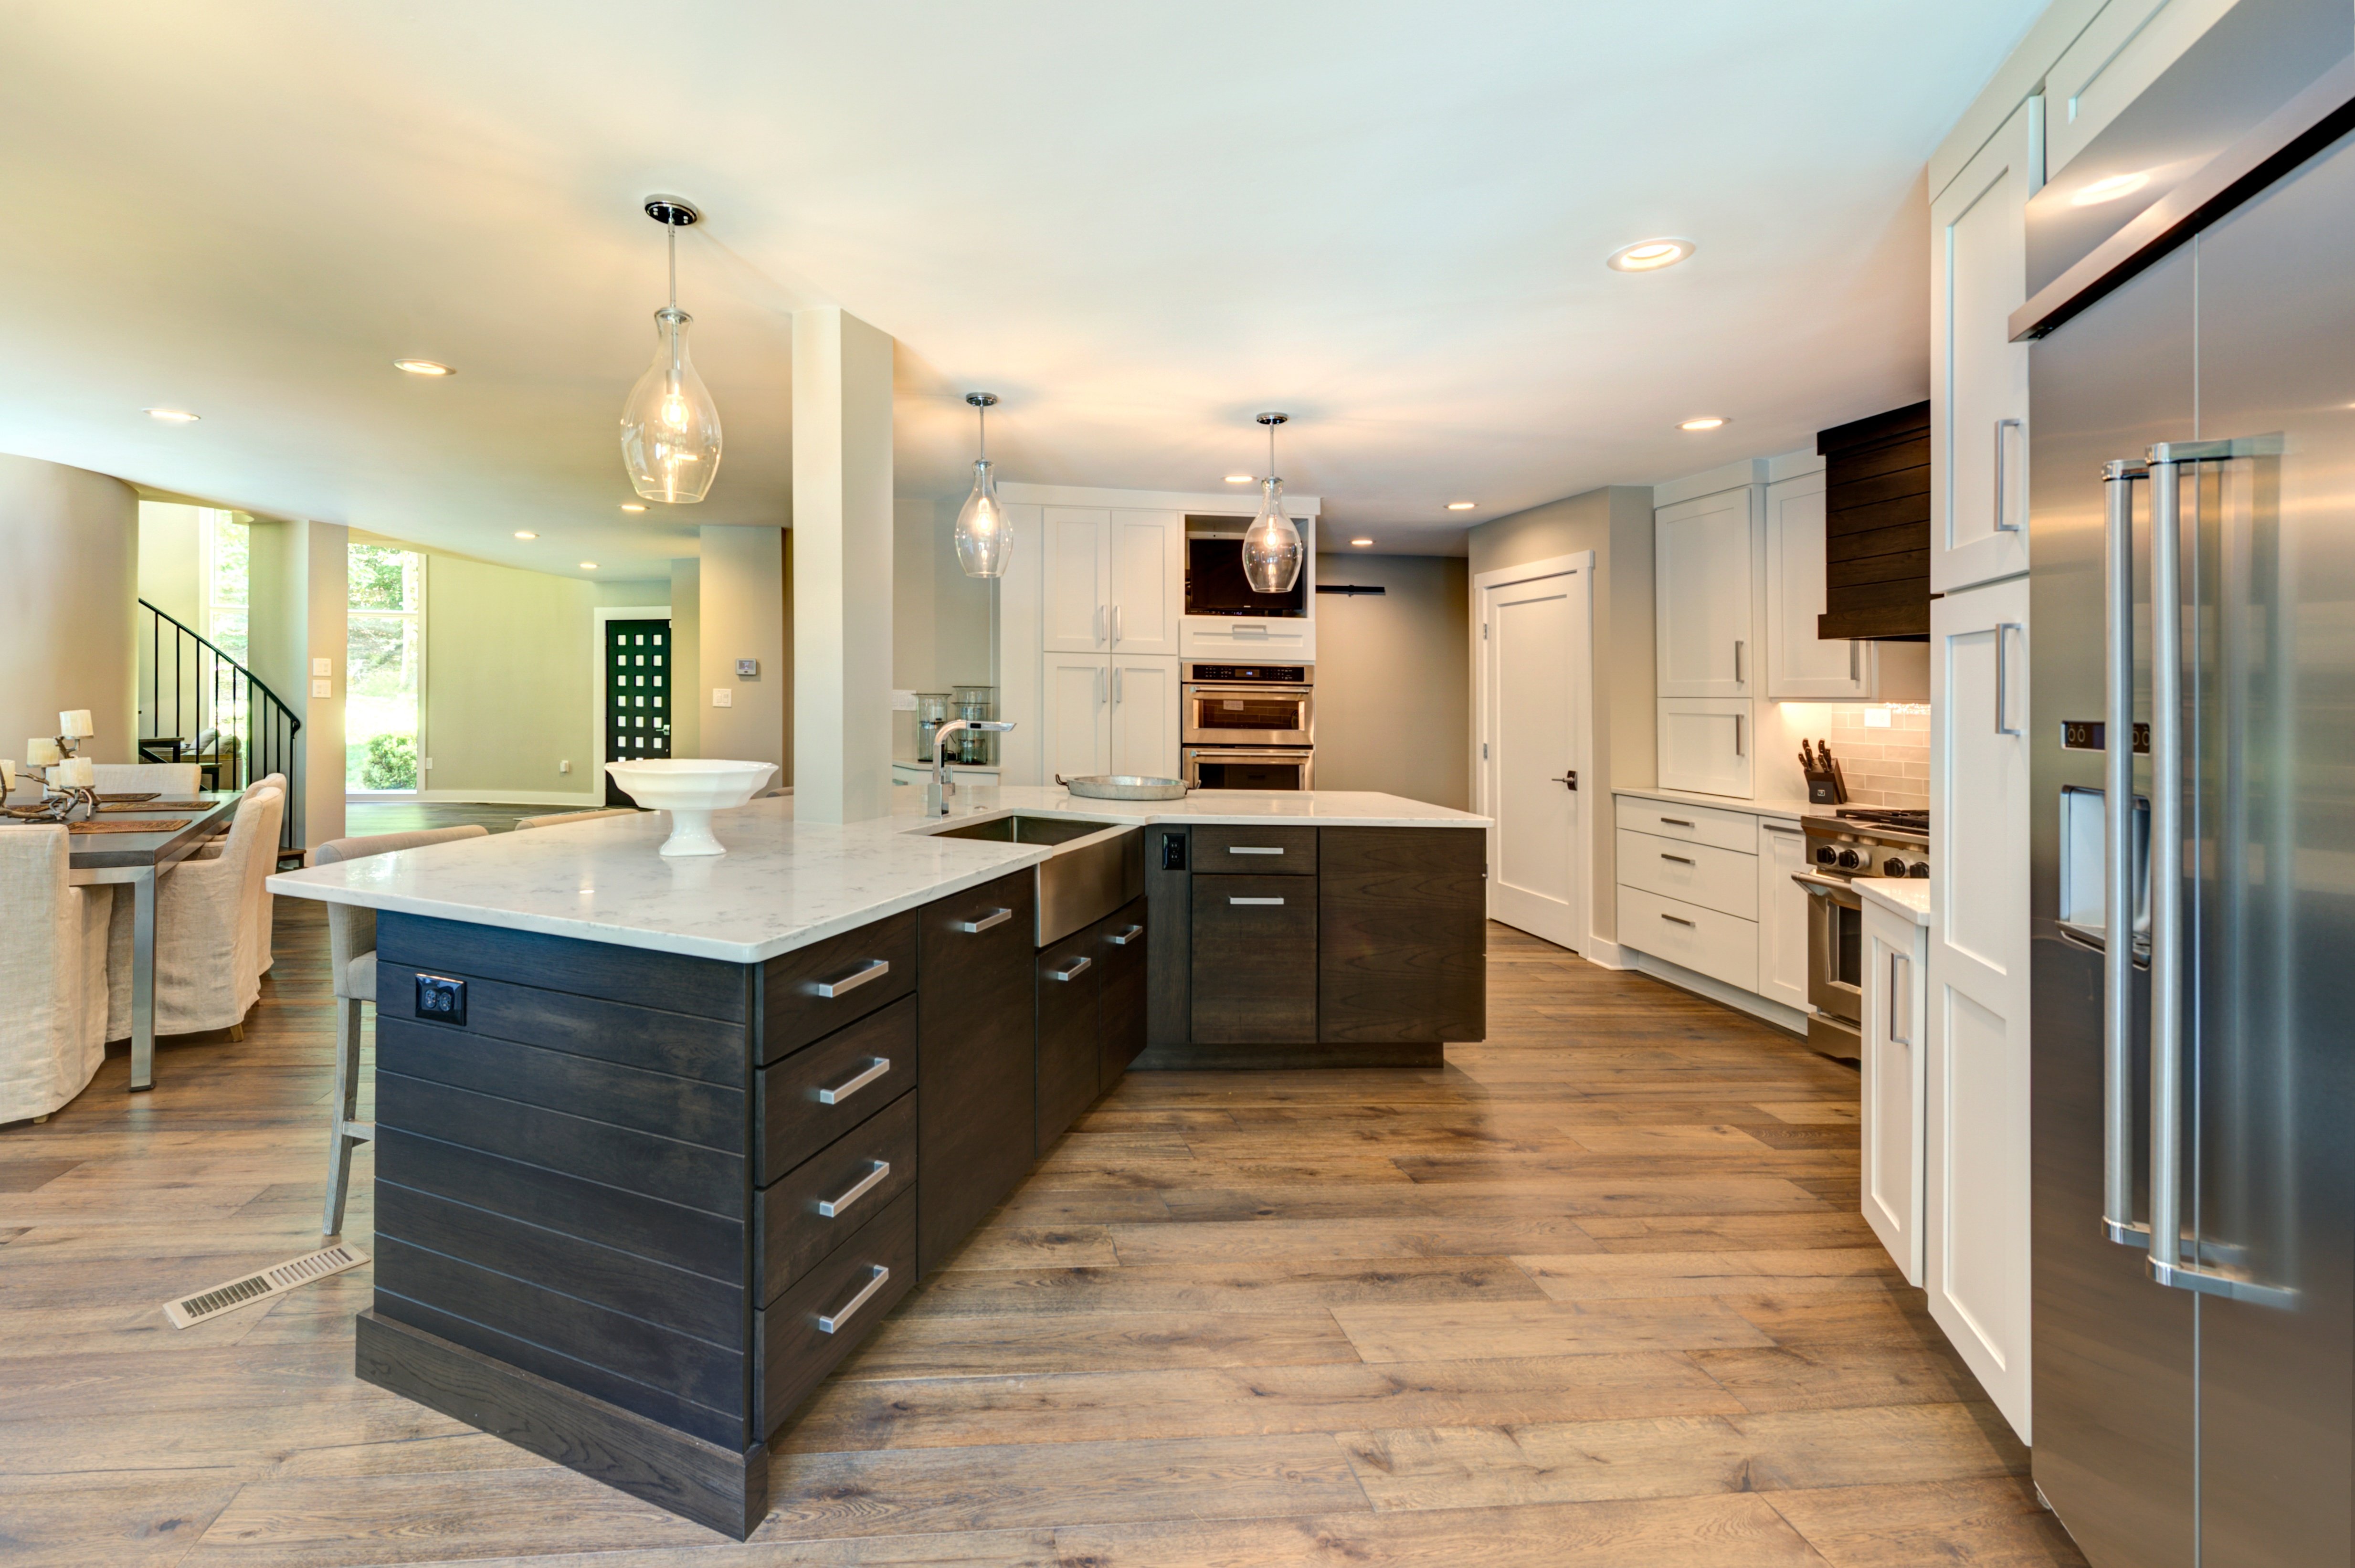 Hard wood floors and dark brown cabinets with white countertops in kitchen